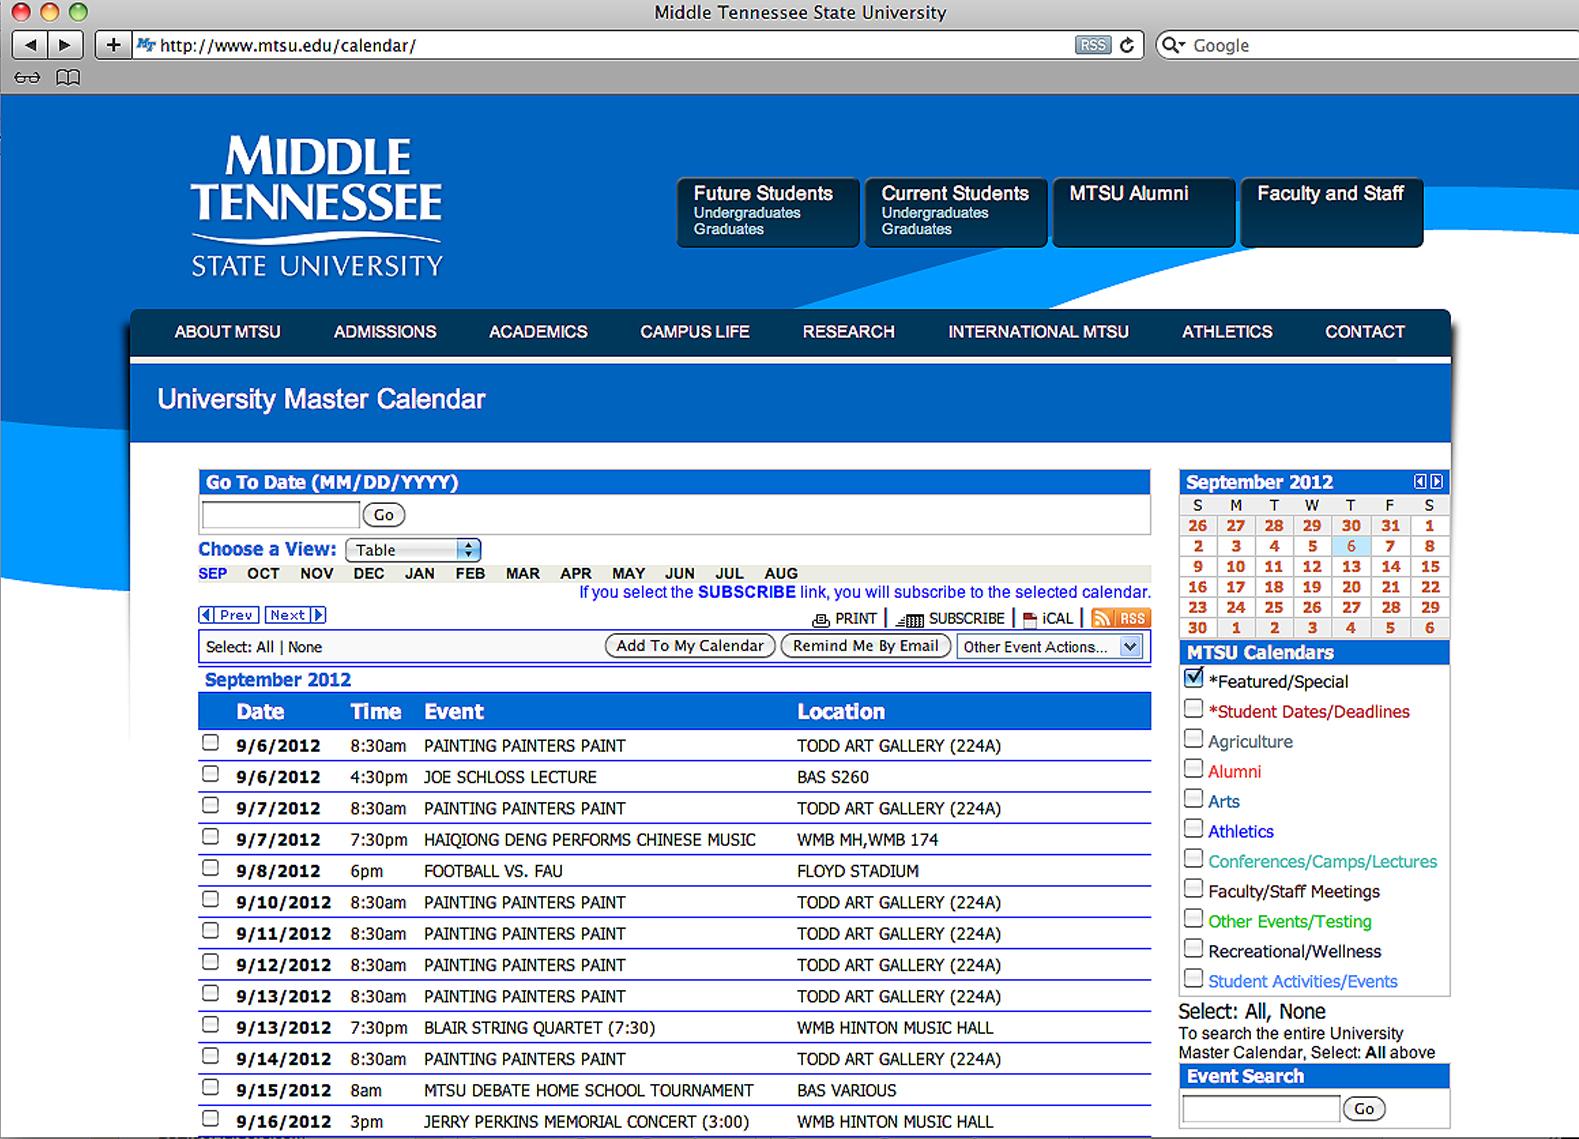 MTSU s New Online Master Calendar Helps Users Find Events and Deadlines